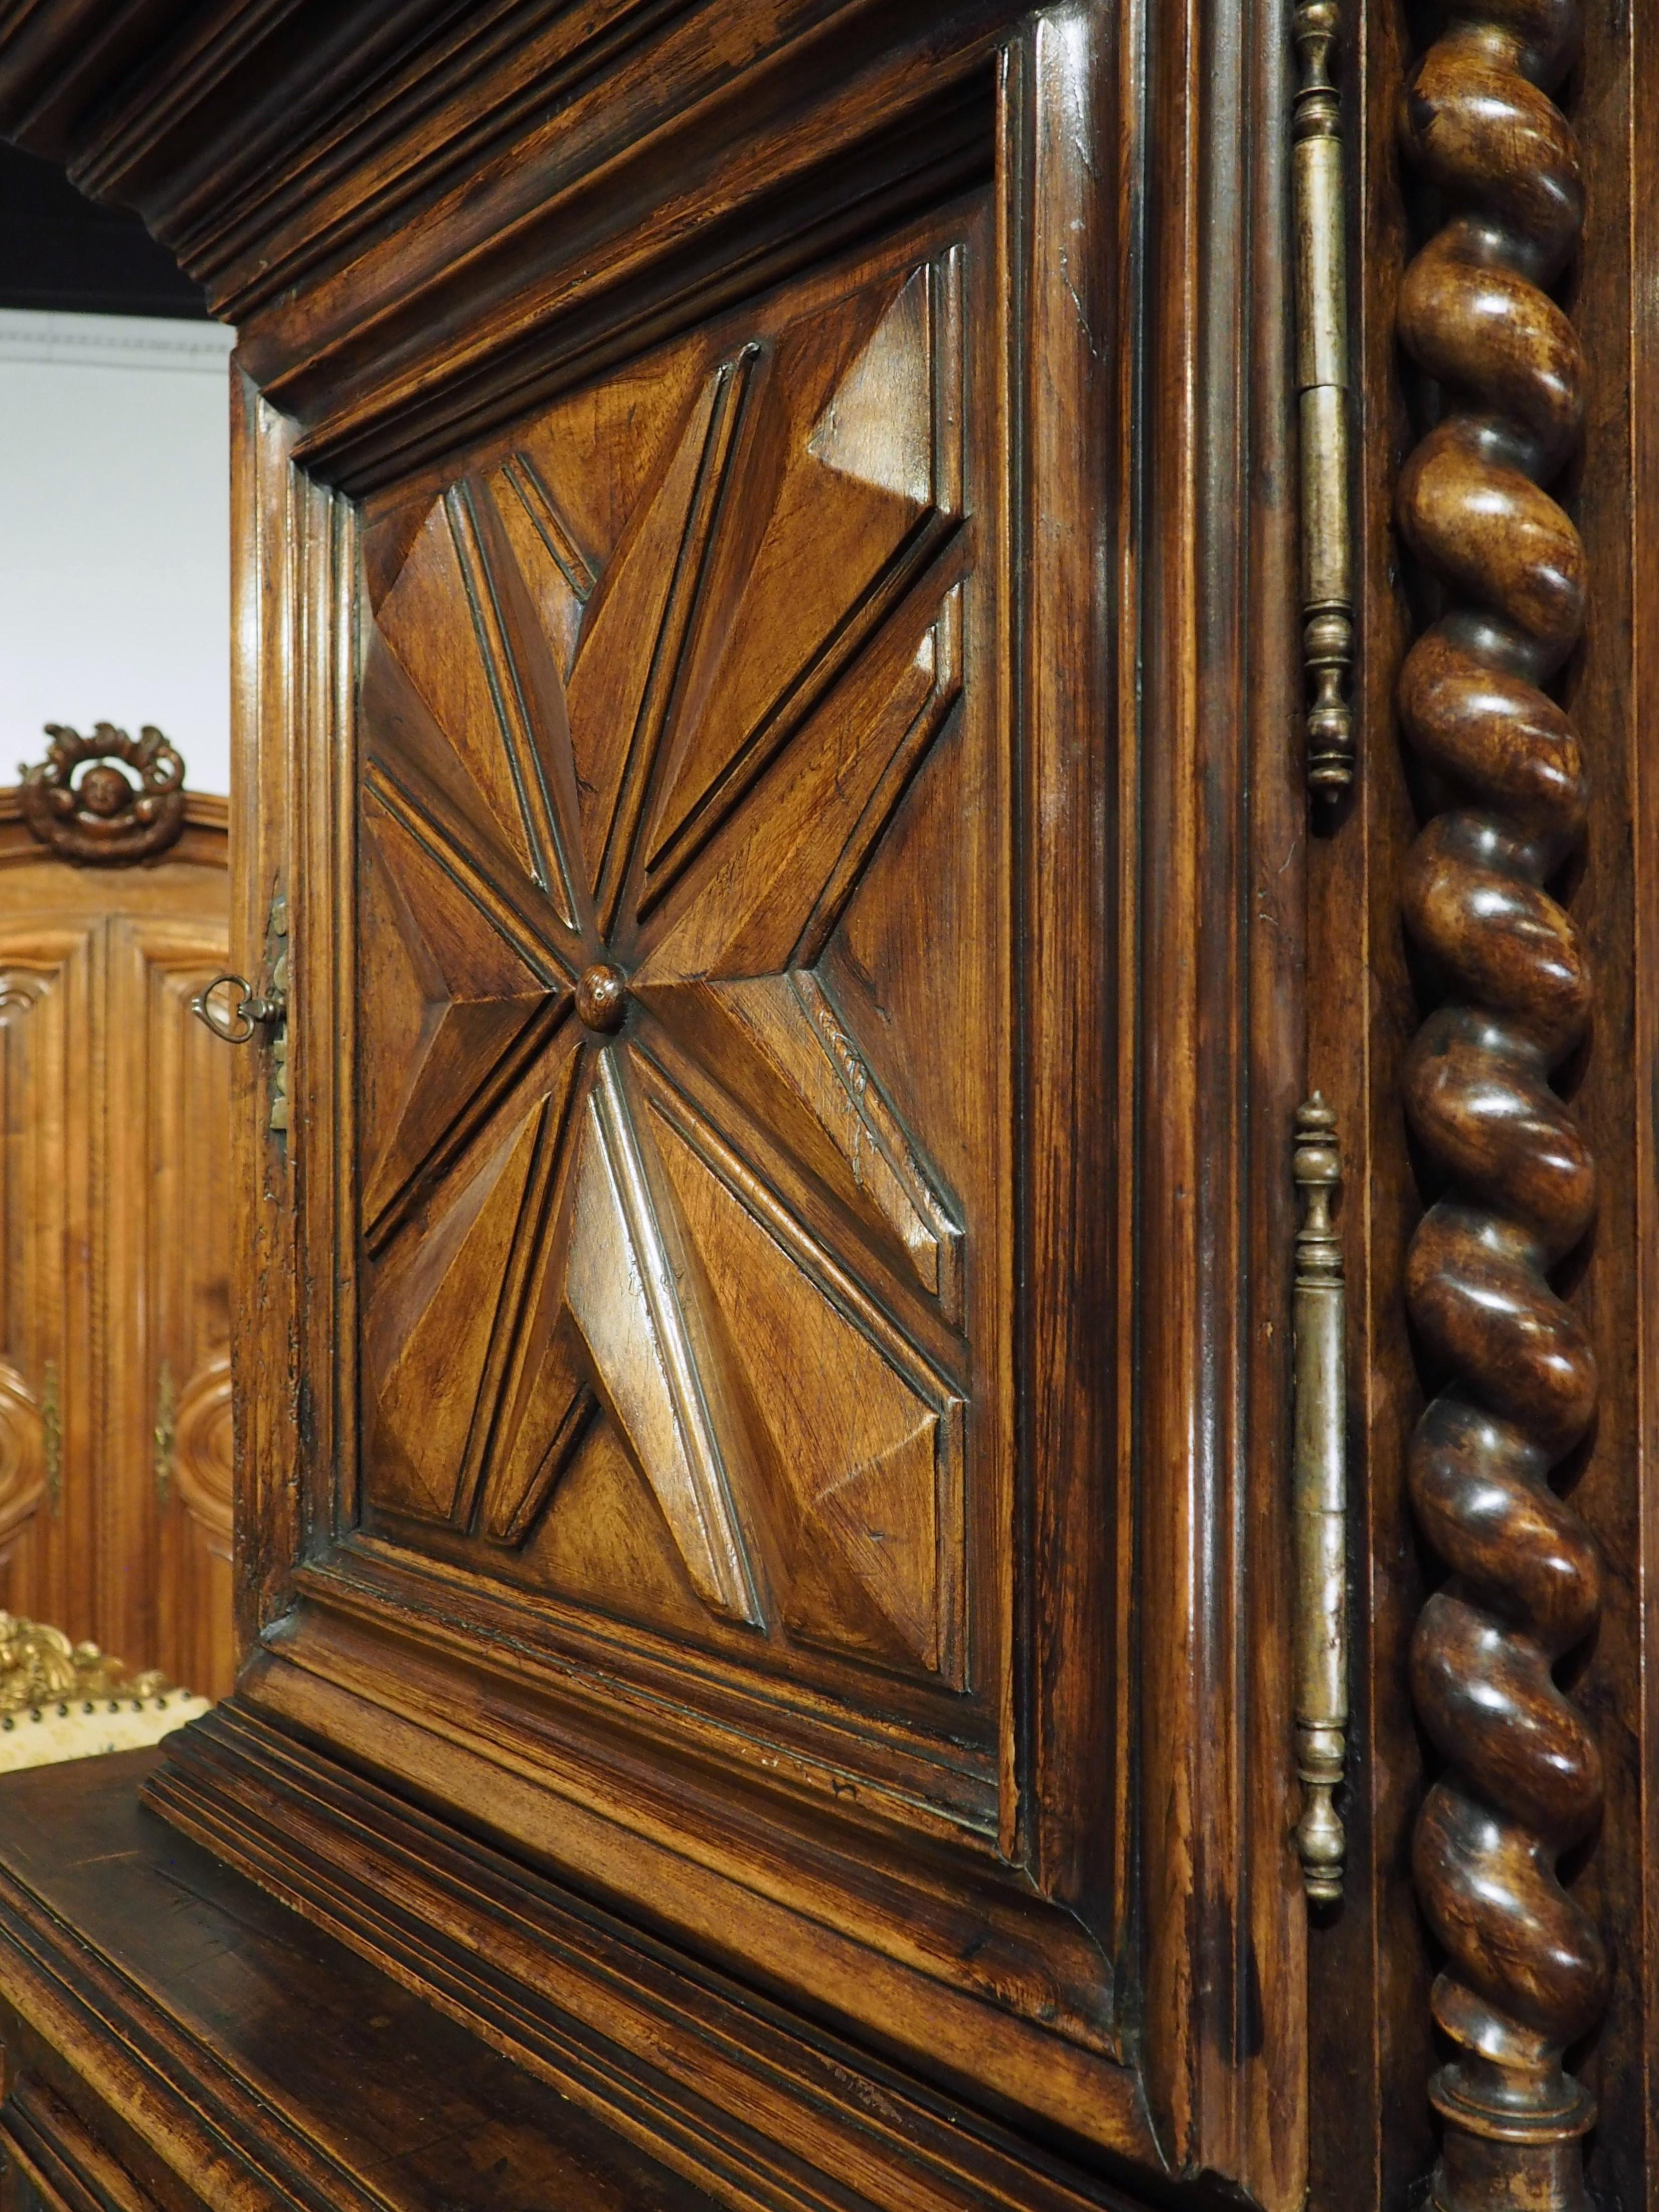 This unique buffet deux corps was hand-carved from walnut wood in France during the Louis XIII period (1600’s). A buffet deux corps (literally “two body buffet”) is a two-tiered cabinet where the upper section sits on top of a wider lower